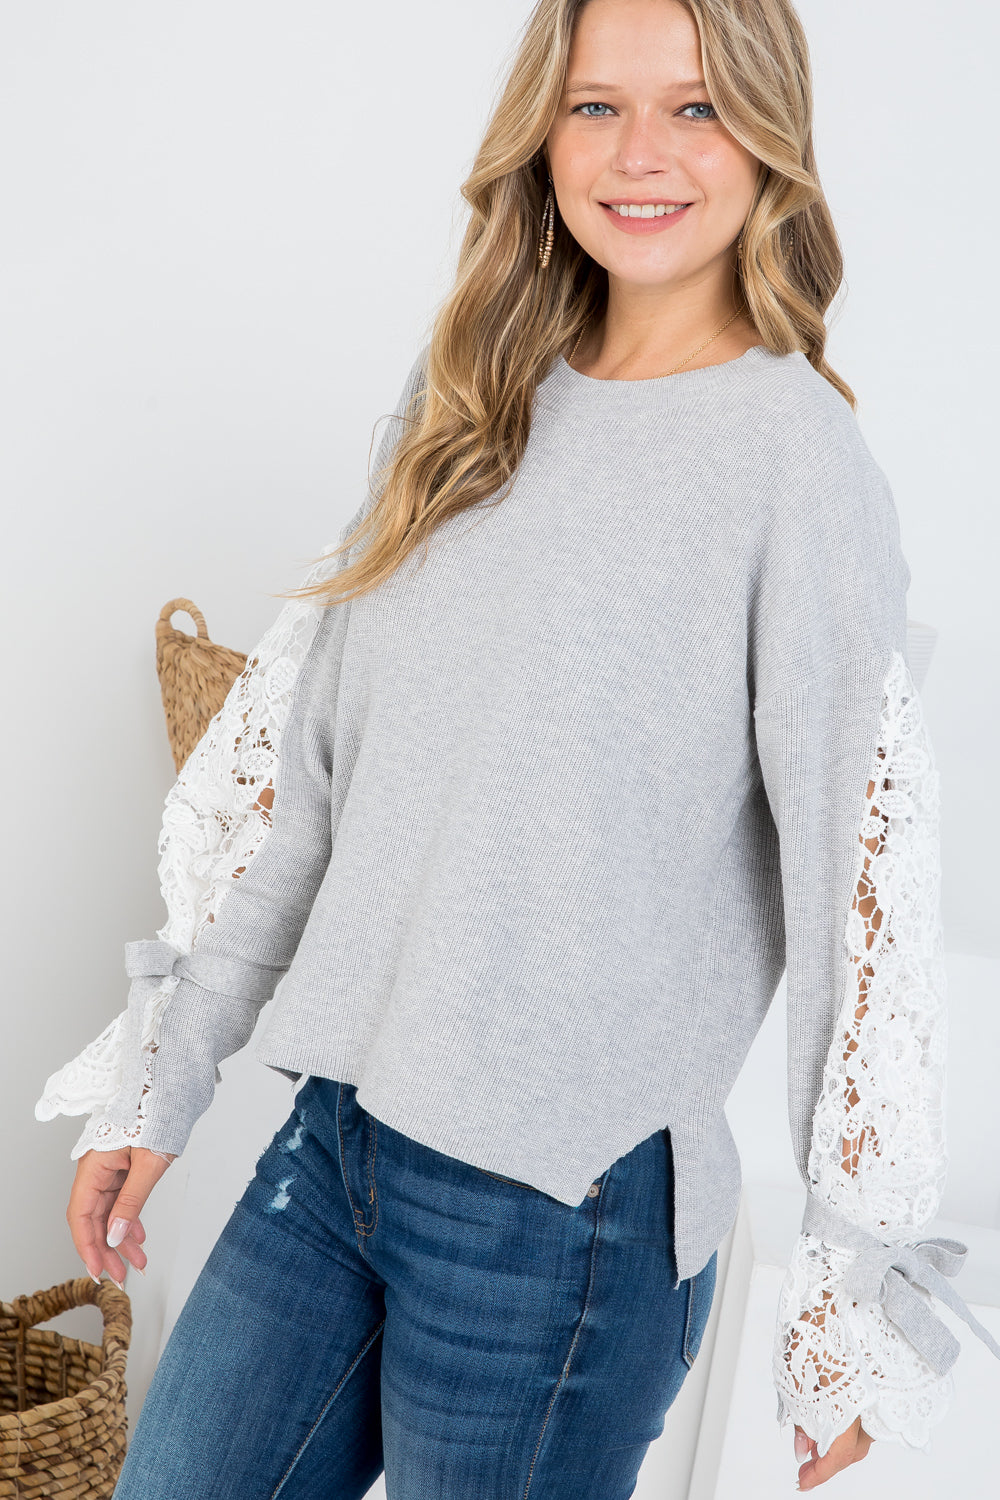 Lace Contrasted Drop Shoulder Round Neck Sweater Top